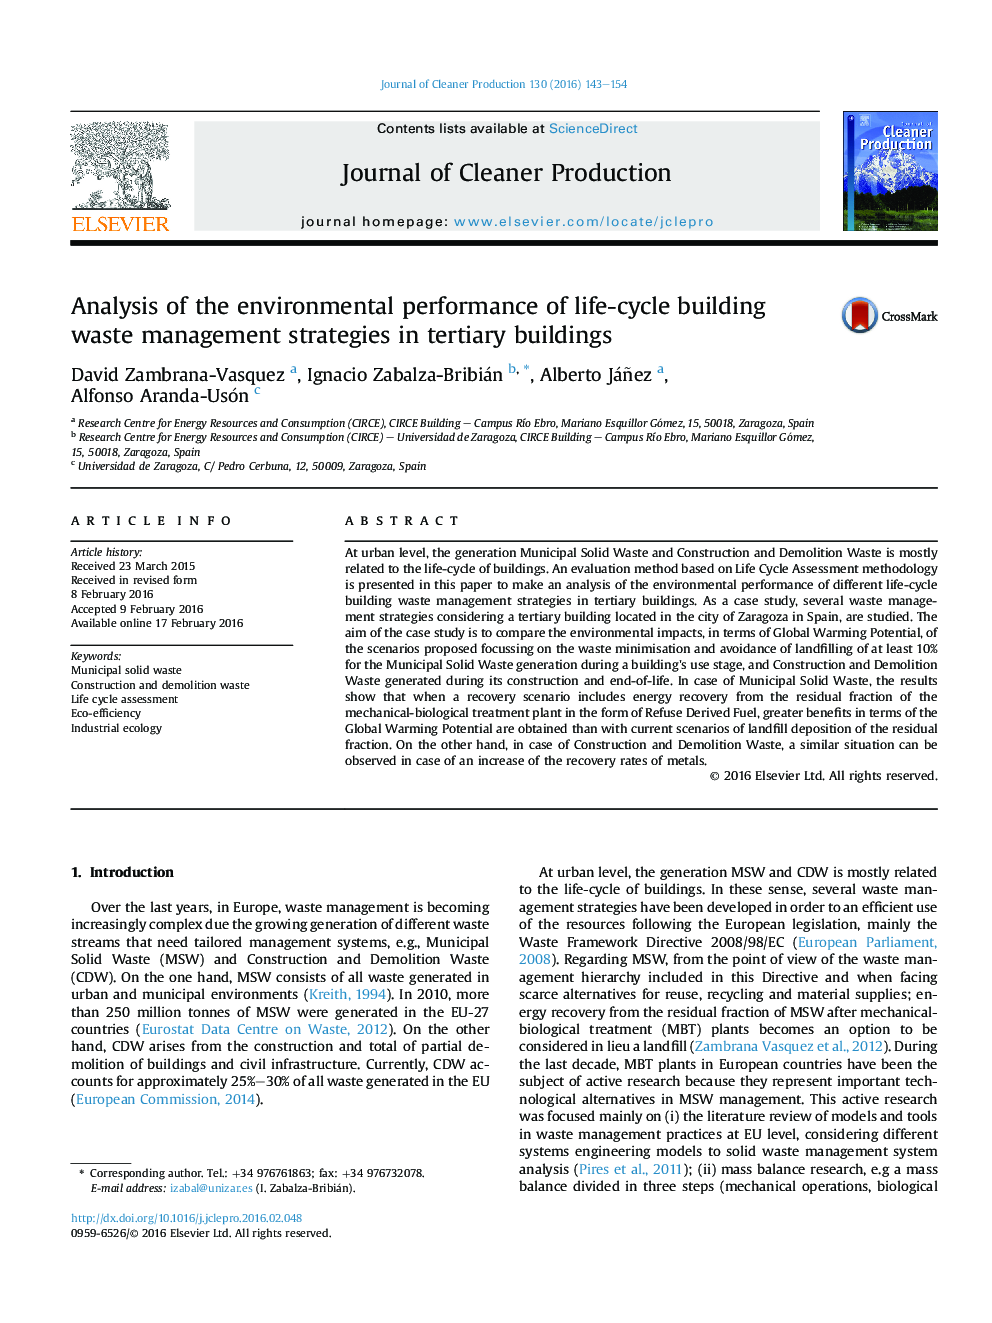 Analysis of the environmental performance of life-cycle building waste management strategies in tertiary buildings